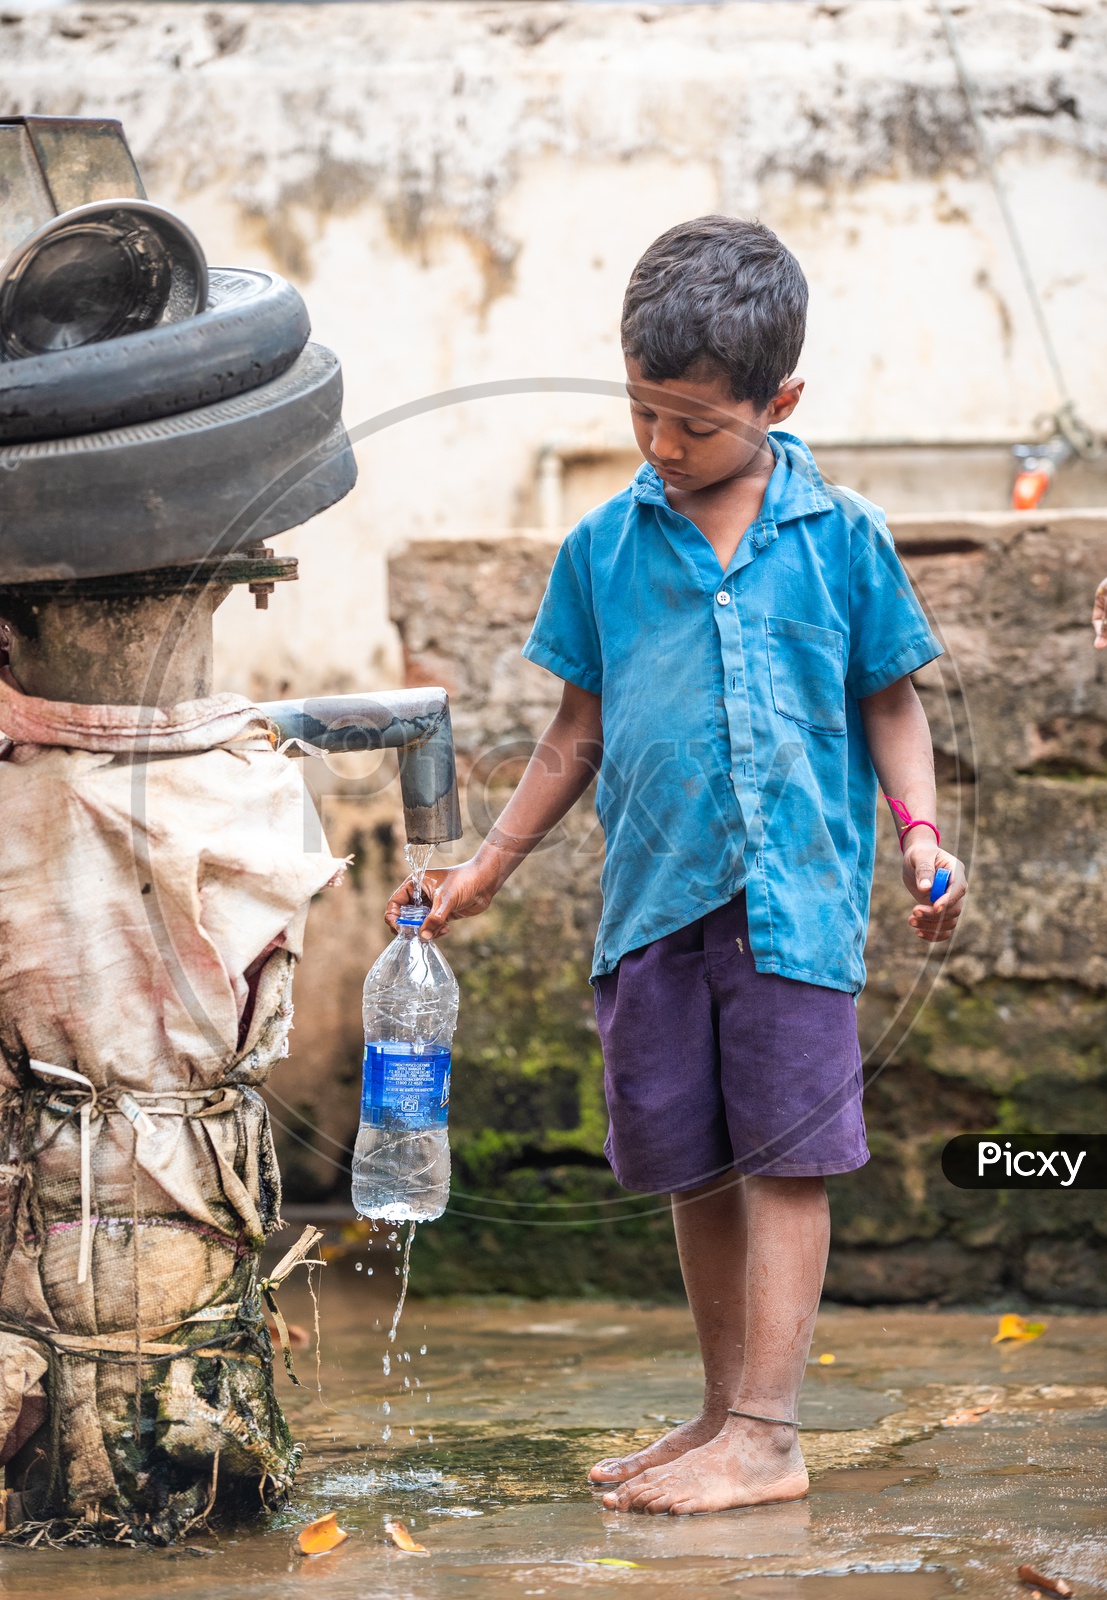 A primary school student filling his water bottle near a hand pump